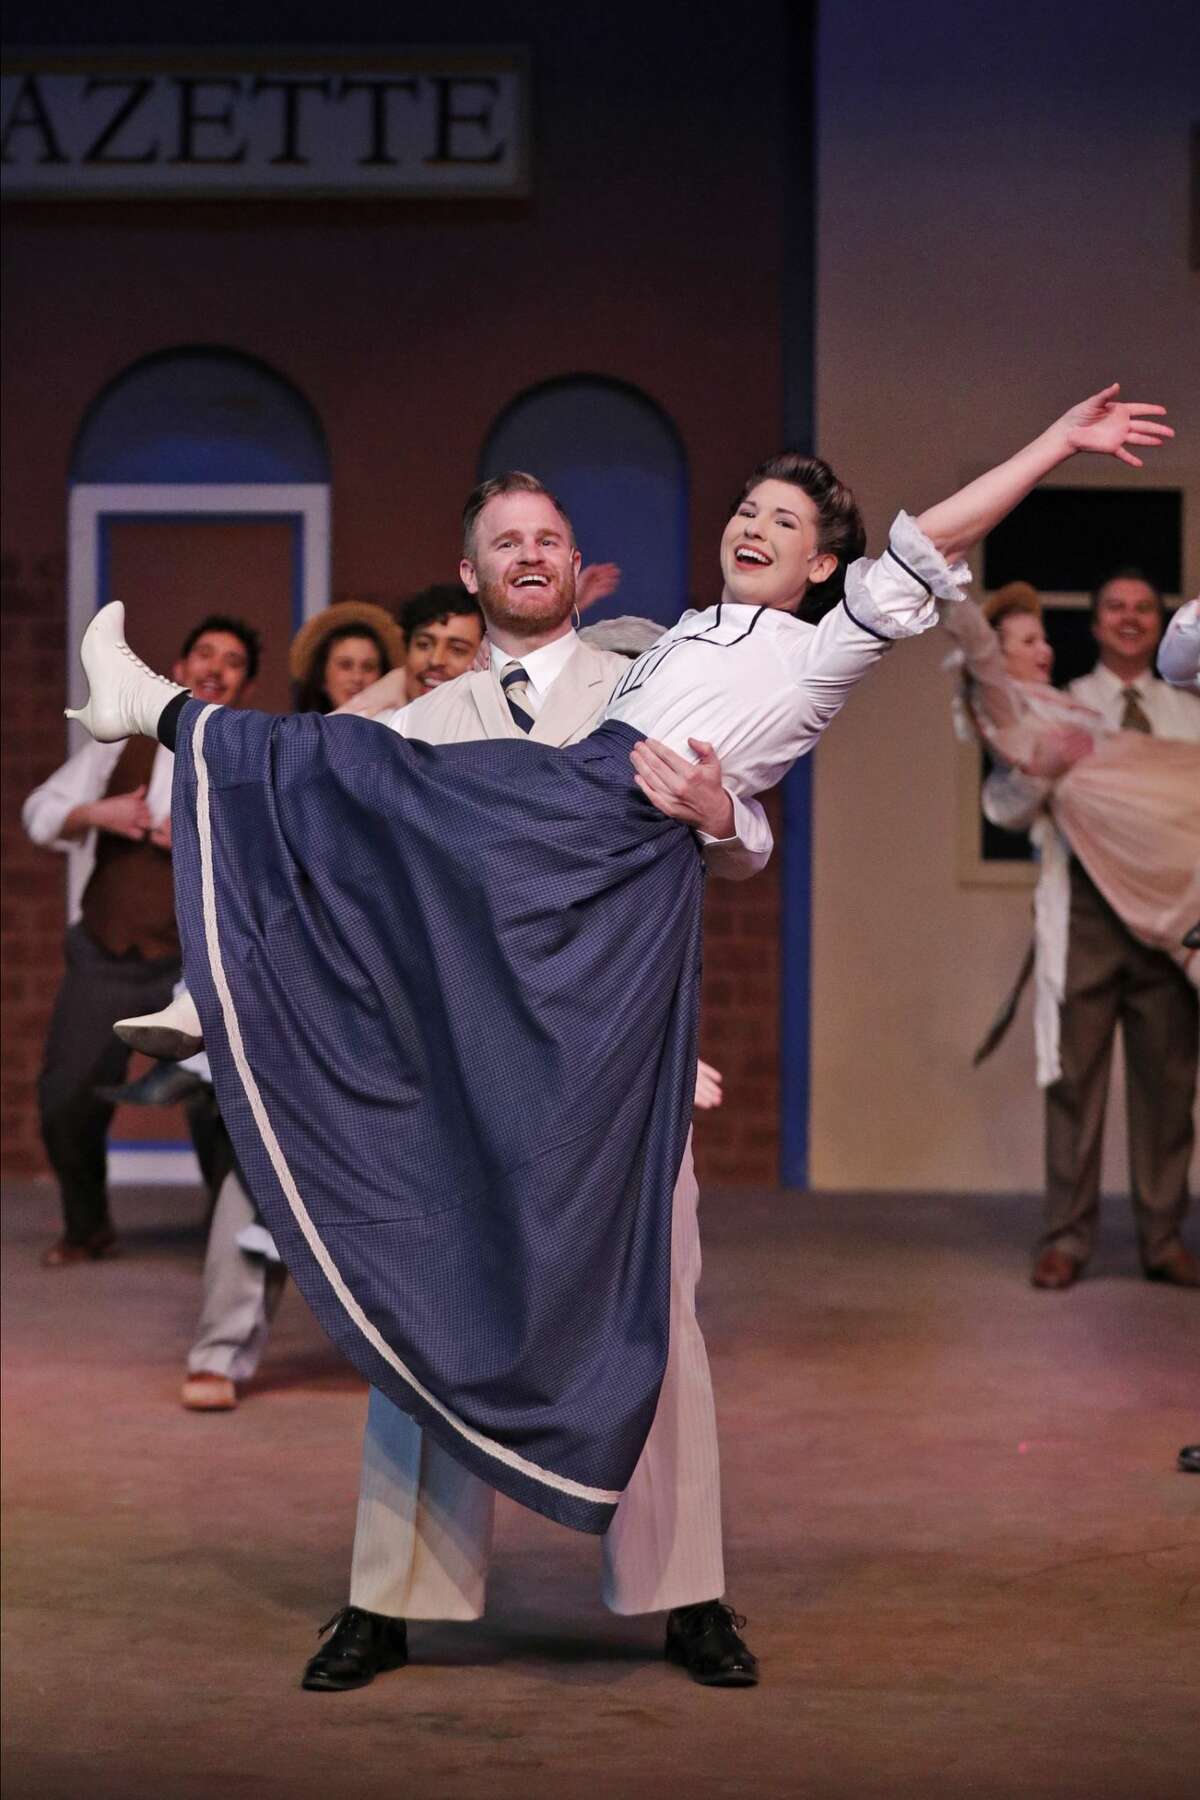 The Music Man, Harold Hill (played by Mark Kaufman), breaks his usual scheme of peddling promises from town to town when he falls in love with Marian the Librarian (played by Renee Pocsik). Promotional photo from dress rehearsal for Midland Community Theatre’s production of “Music Man” photographed January 28, 2020, at MCT.